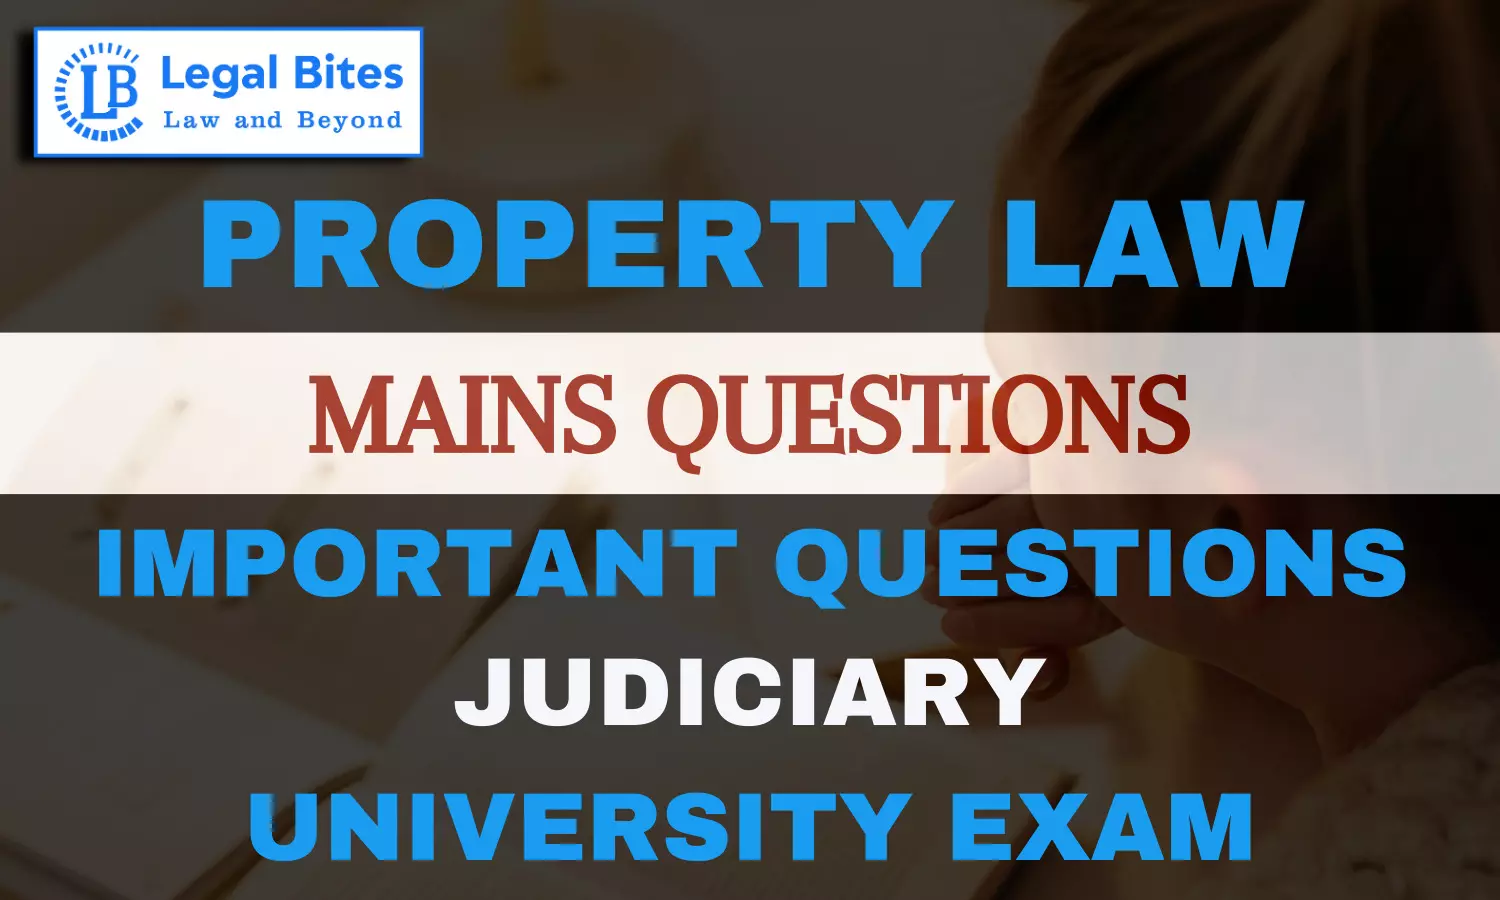 Under what circumstances conditional transfer of property under the Transfer of Property Act, 1882 becomes void? Discuss with reference to statutory provisions and case law.